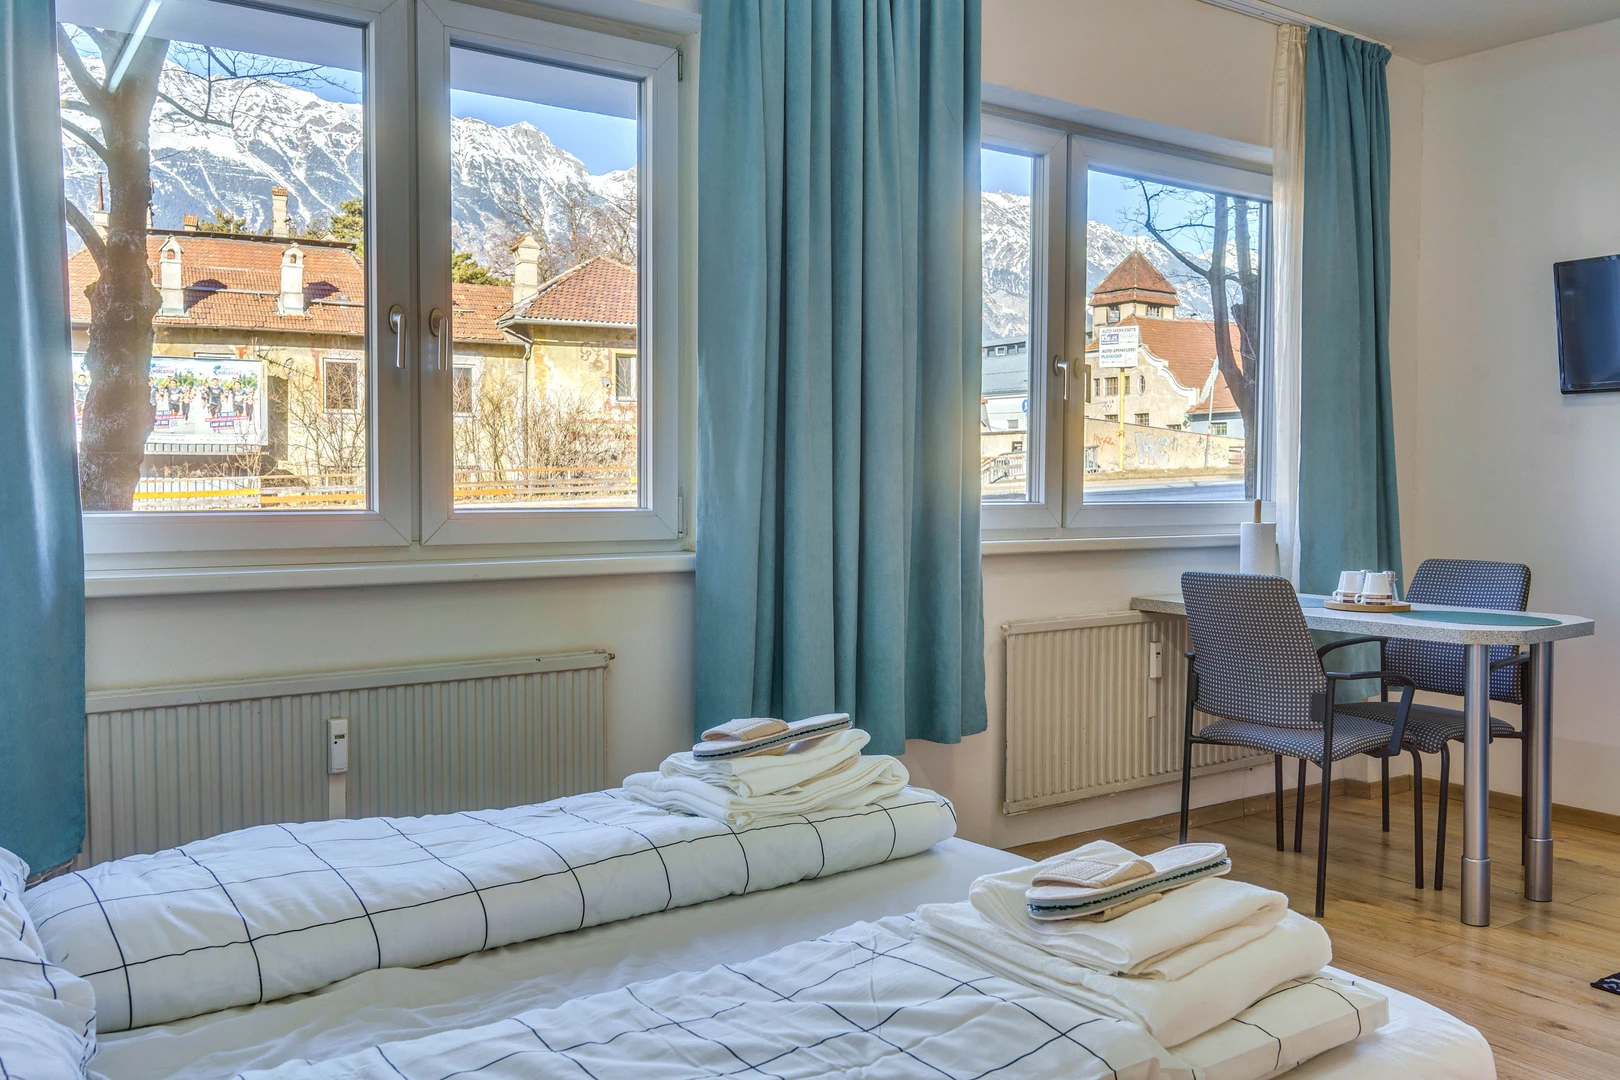 Room for rent in a shared flat in Innsbruck